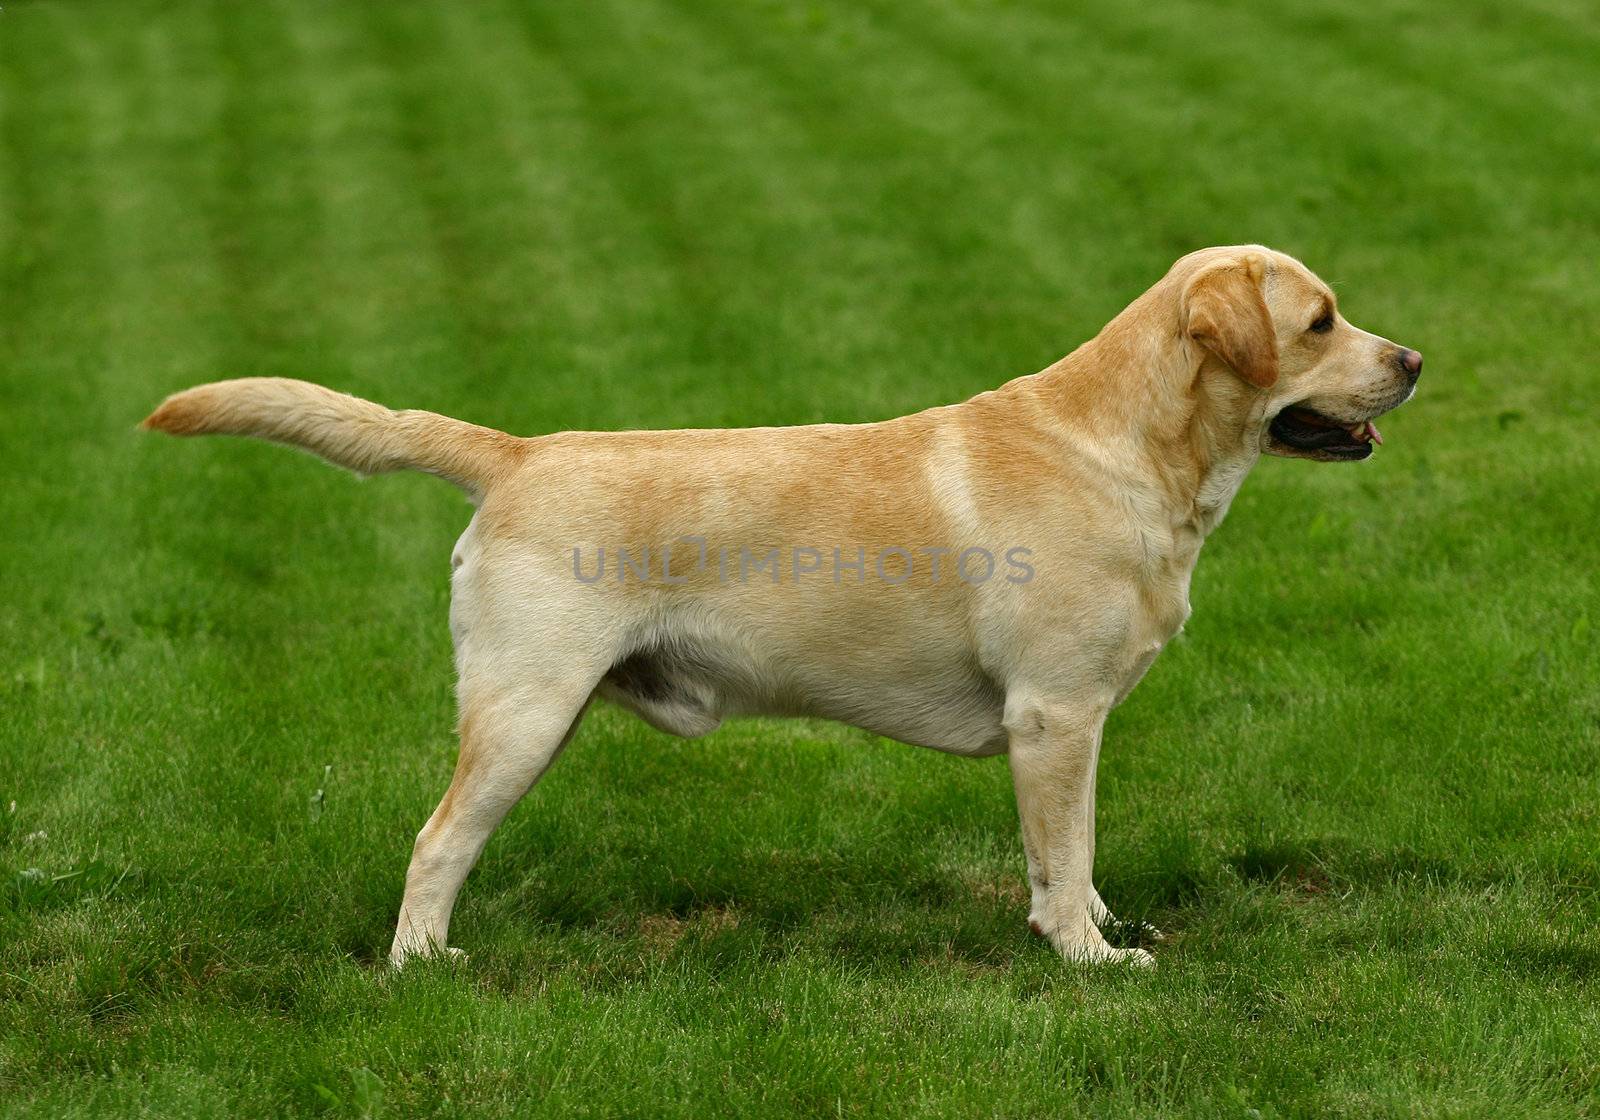 The white dog costs sideways on a lawn